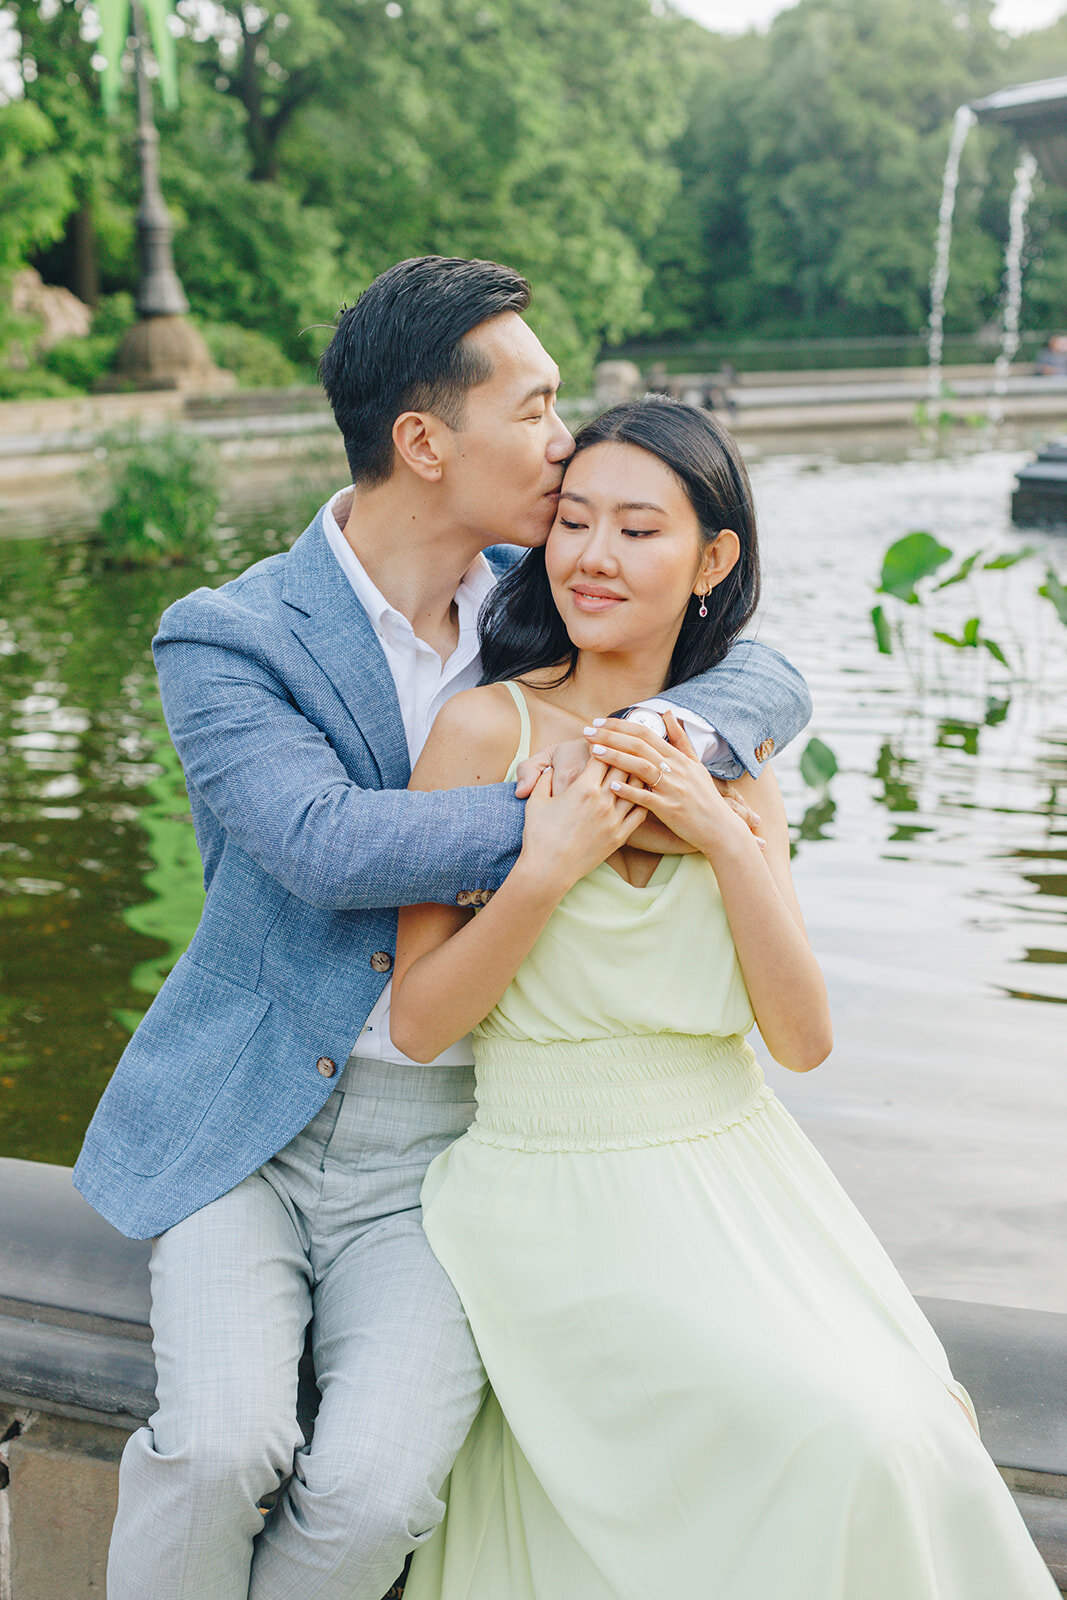 Wild_Sound_Photography_Central_Park_Engagement_Danny_LisaEY3A9795_websize